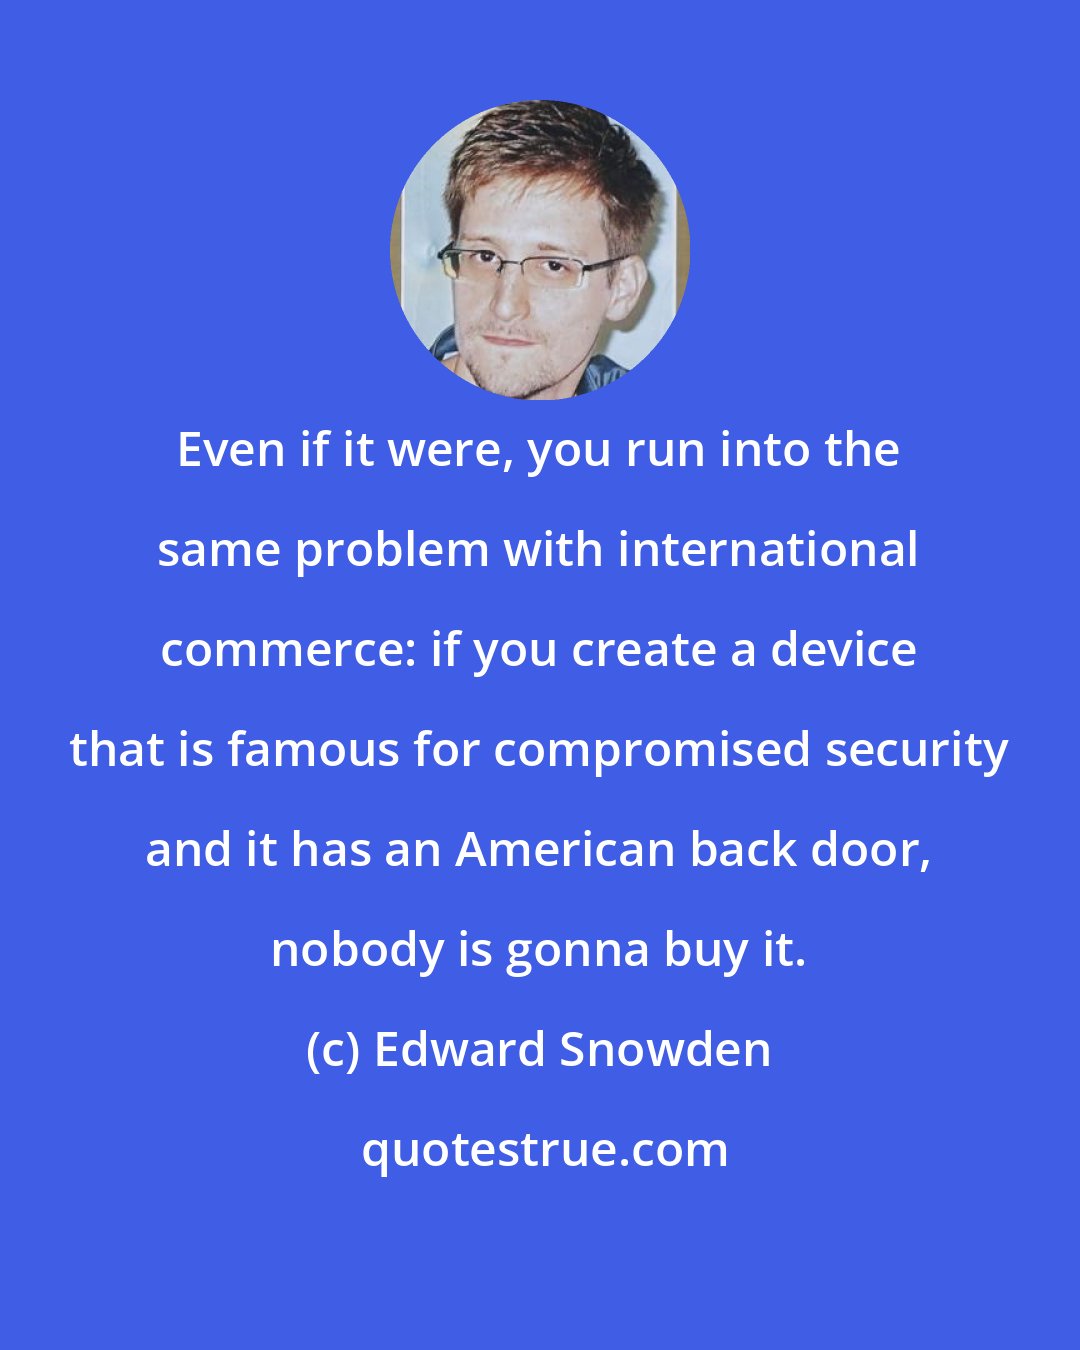 Edward Snowden: Even if it were, you run into the same problem with international commerce: if you create a device that is famous for compromised security and it has an American back door, nobody is gonna buy it.